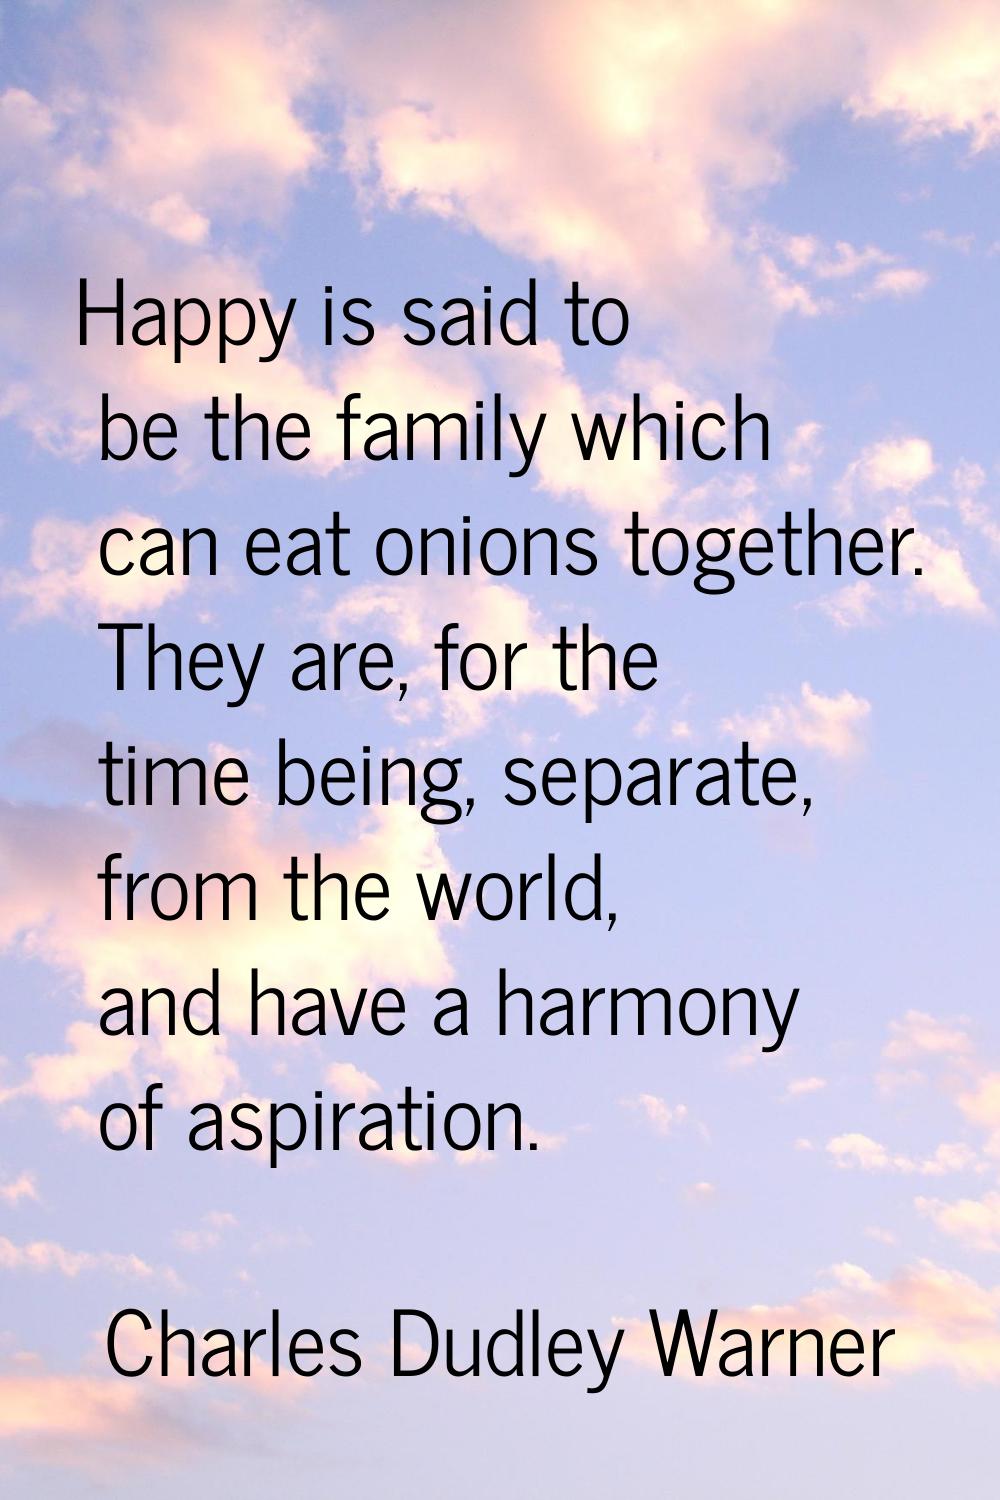 Happy is said to be the family which can eat onions together. They are, for the time being, separat